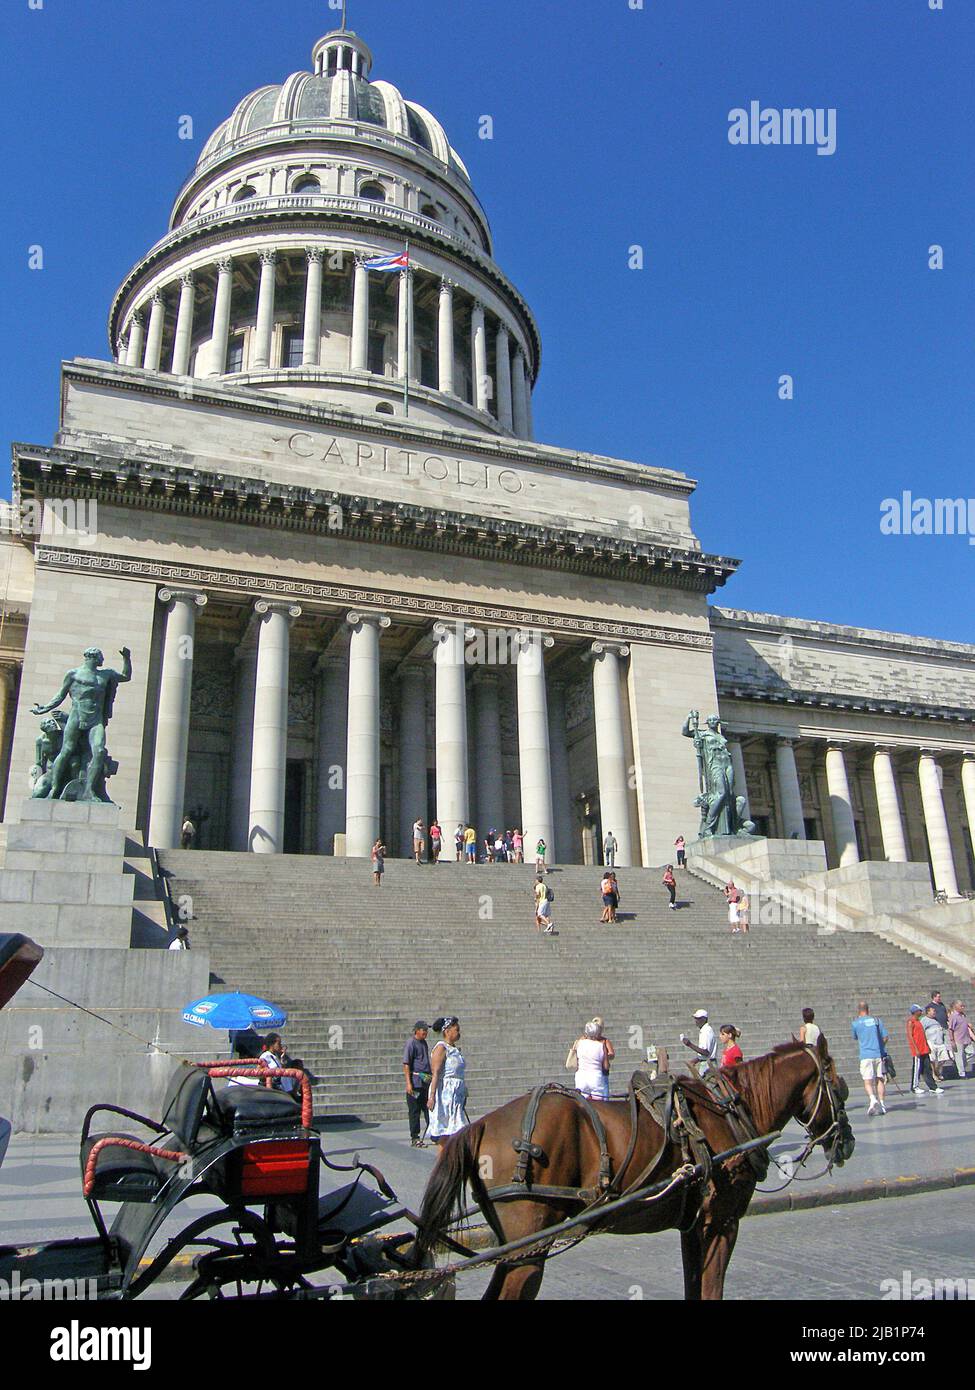 Horse carriage at the Capitol, Plaza de la Catedral, old t Stock Photo